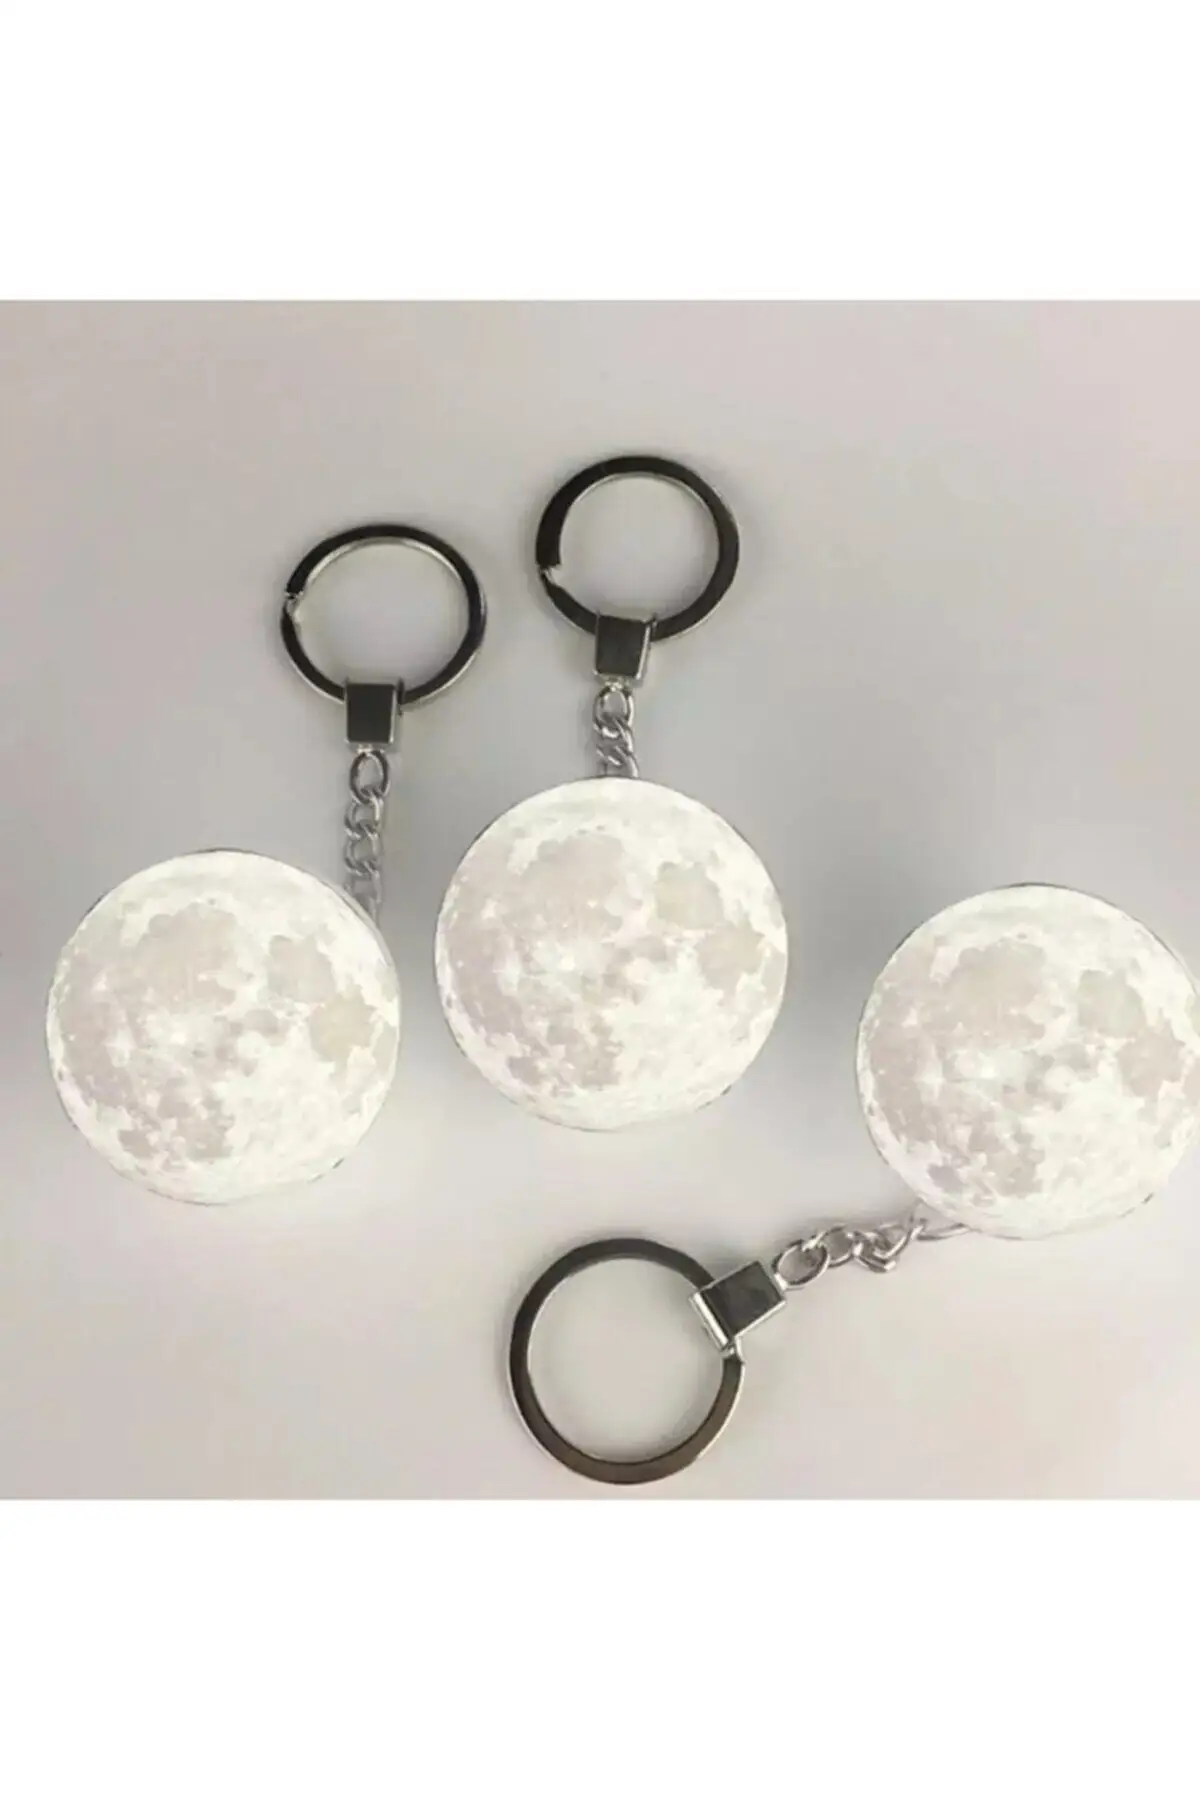 3d Moon Lamp Luminous Moon Keychain Gift Products Light Emitting Mini Bulb Home Car Keychains Fashion Jewelry valorant weapon model light keychains imperium mini game peripheral metal pendant accessories birthday gifts toys for boys